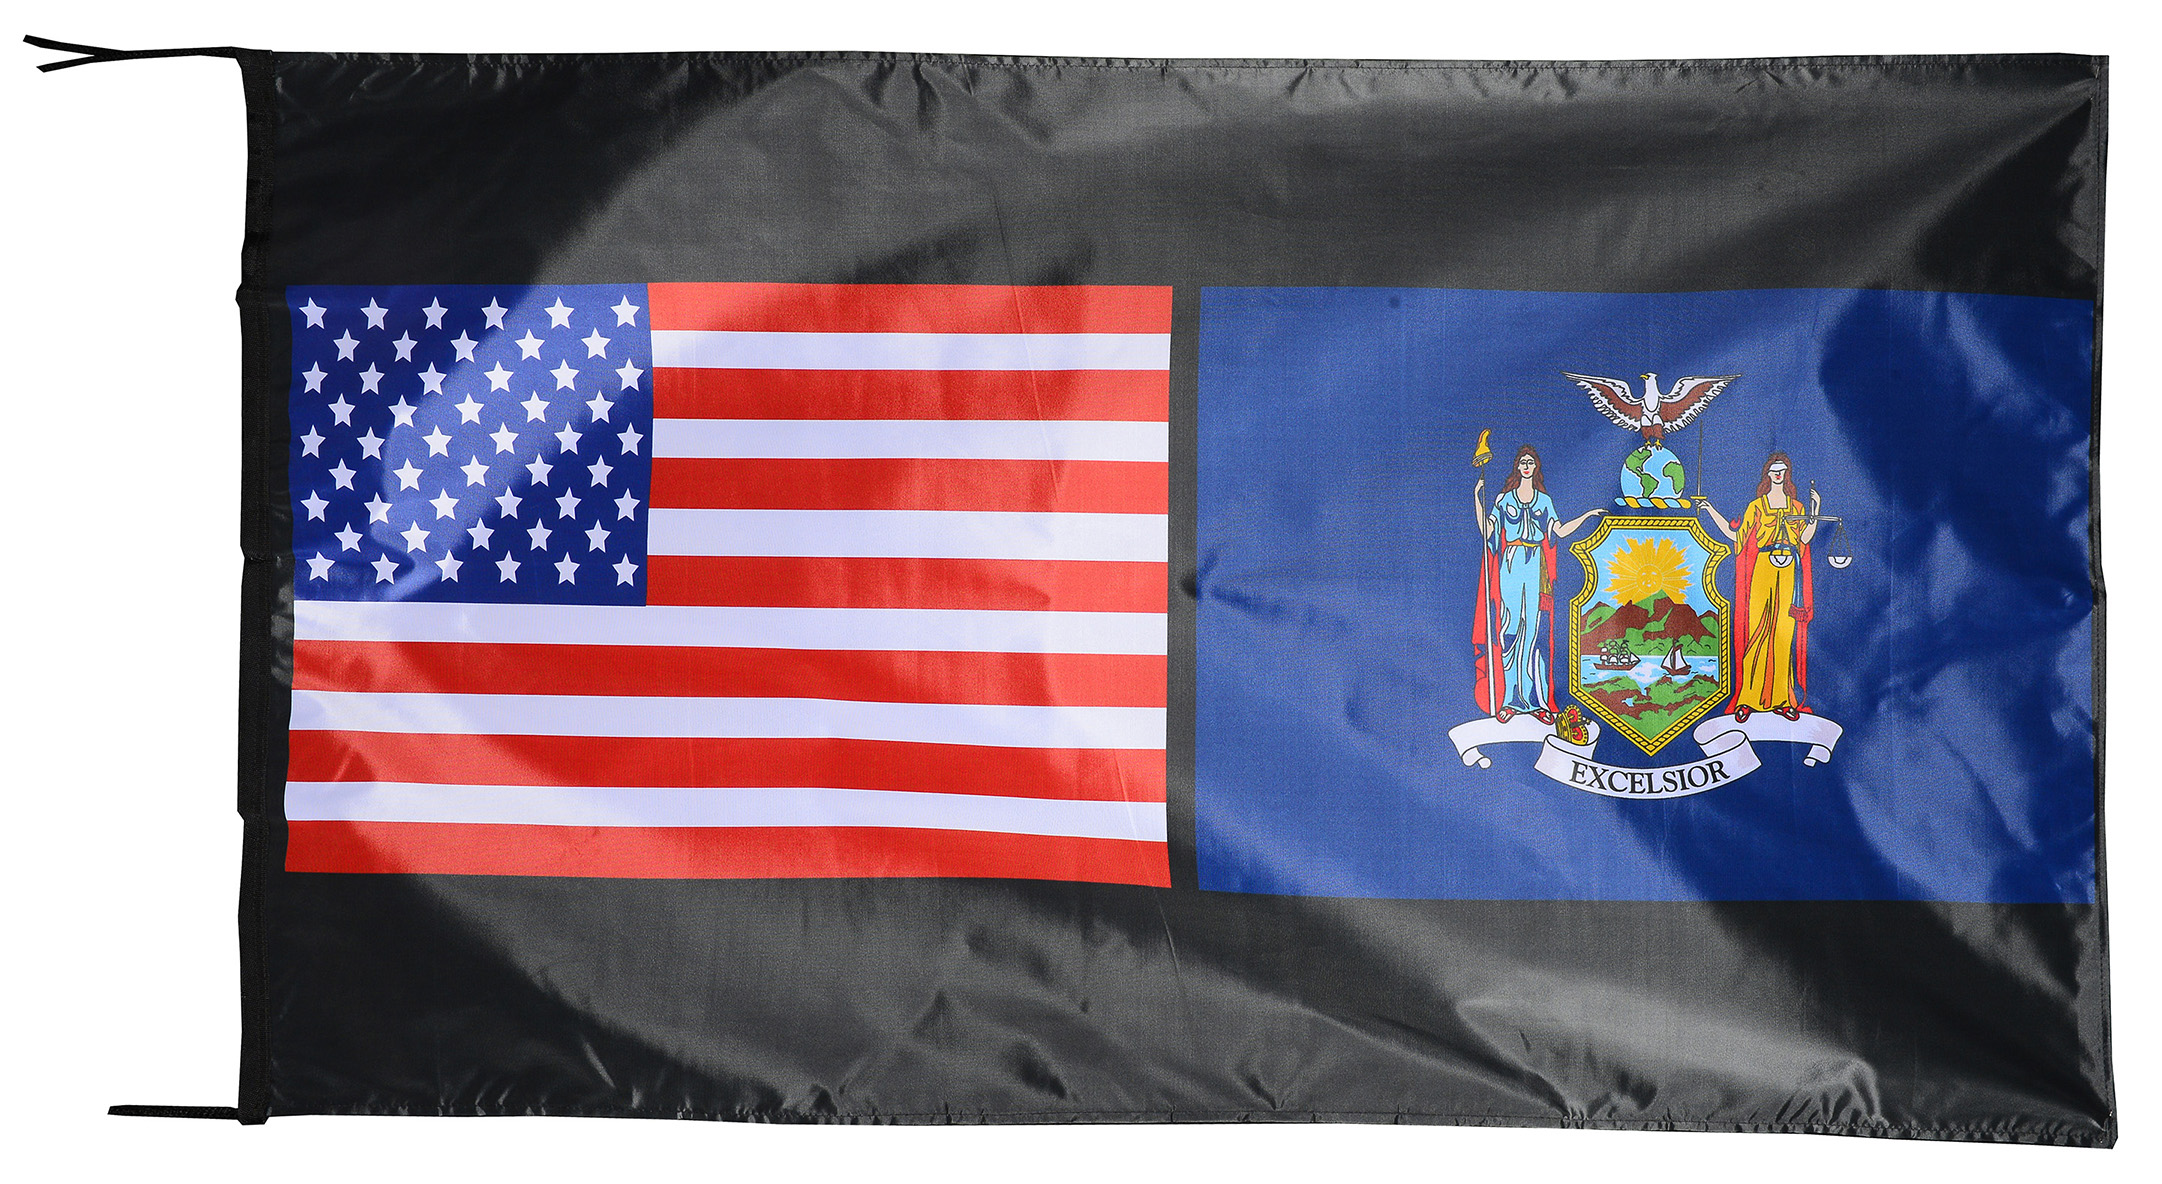 Flag  011 USA / US Country / United States Of America and New York State / American Patriotic / Pride Hybrid Weather-Resistant Polyester Outdoor Flag Landscape Banner / Vivid Colors / 3 X 5 FT (150 x 90cm) International Flags for Sale